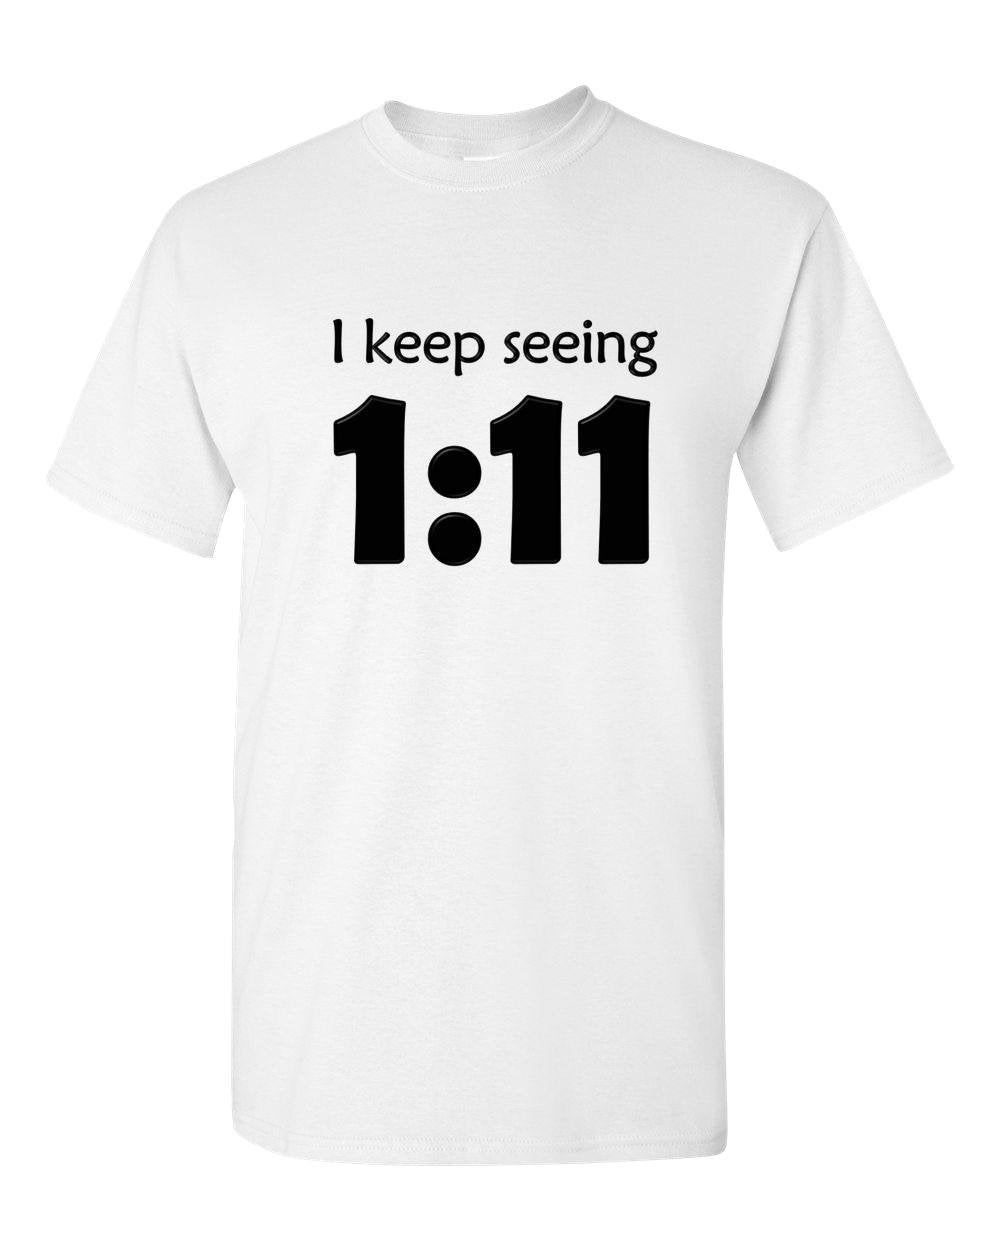 Angel I Keep Seeing 111 - Adult Unisex T-Shirt in multiple colors